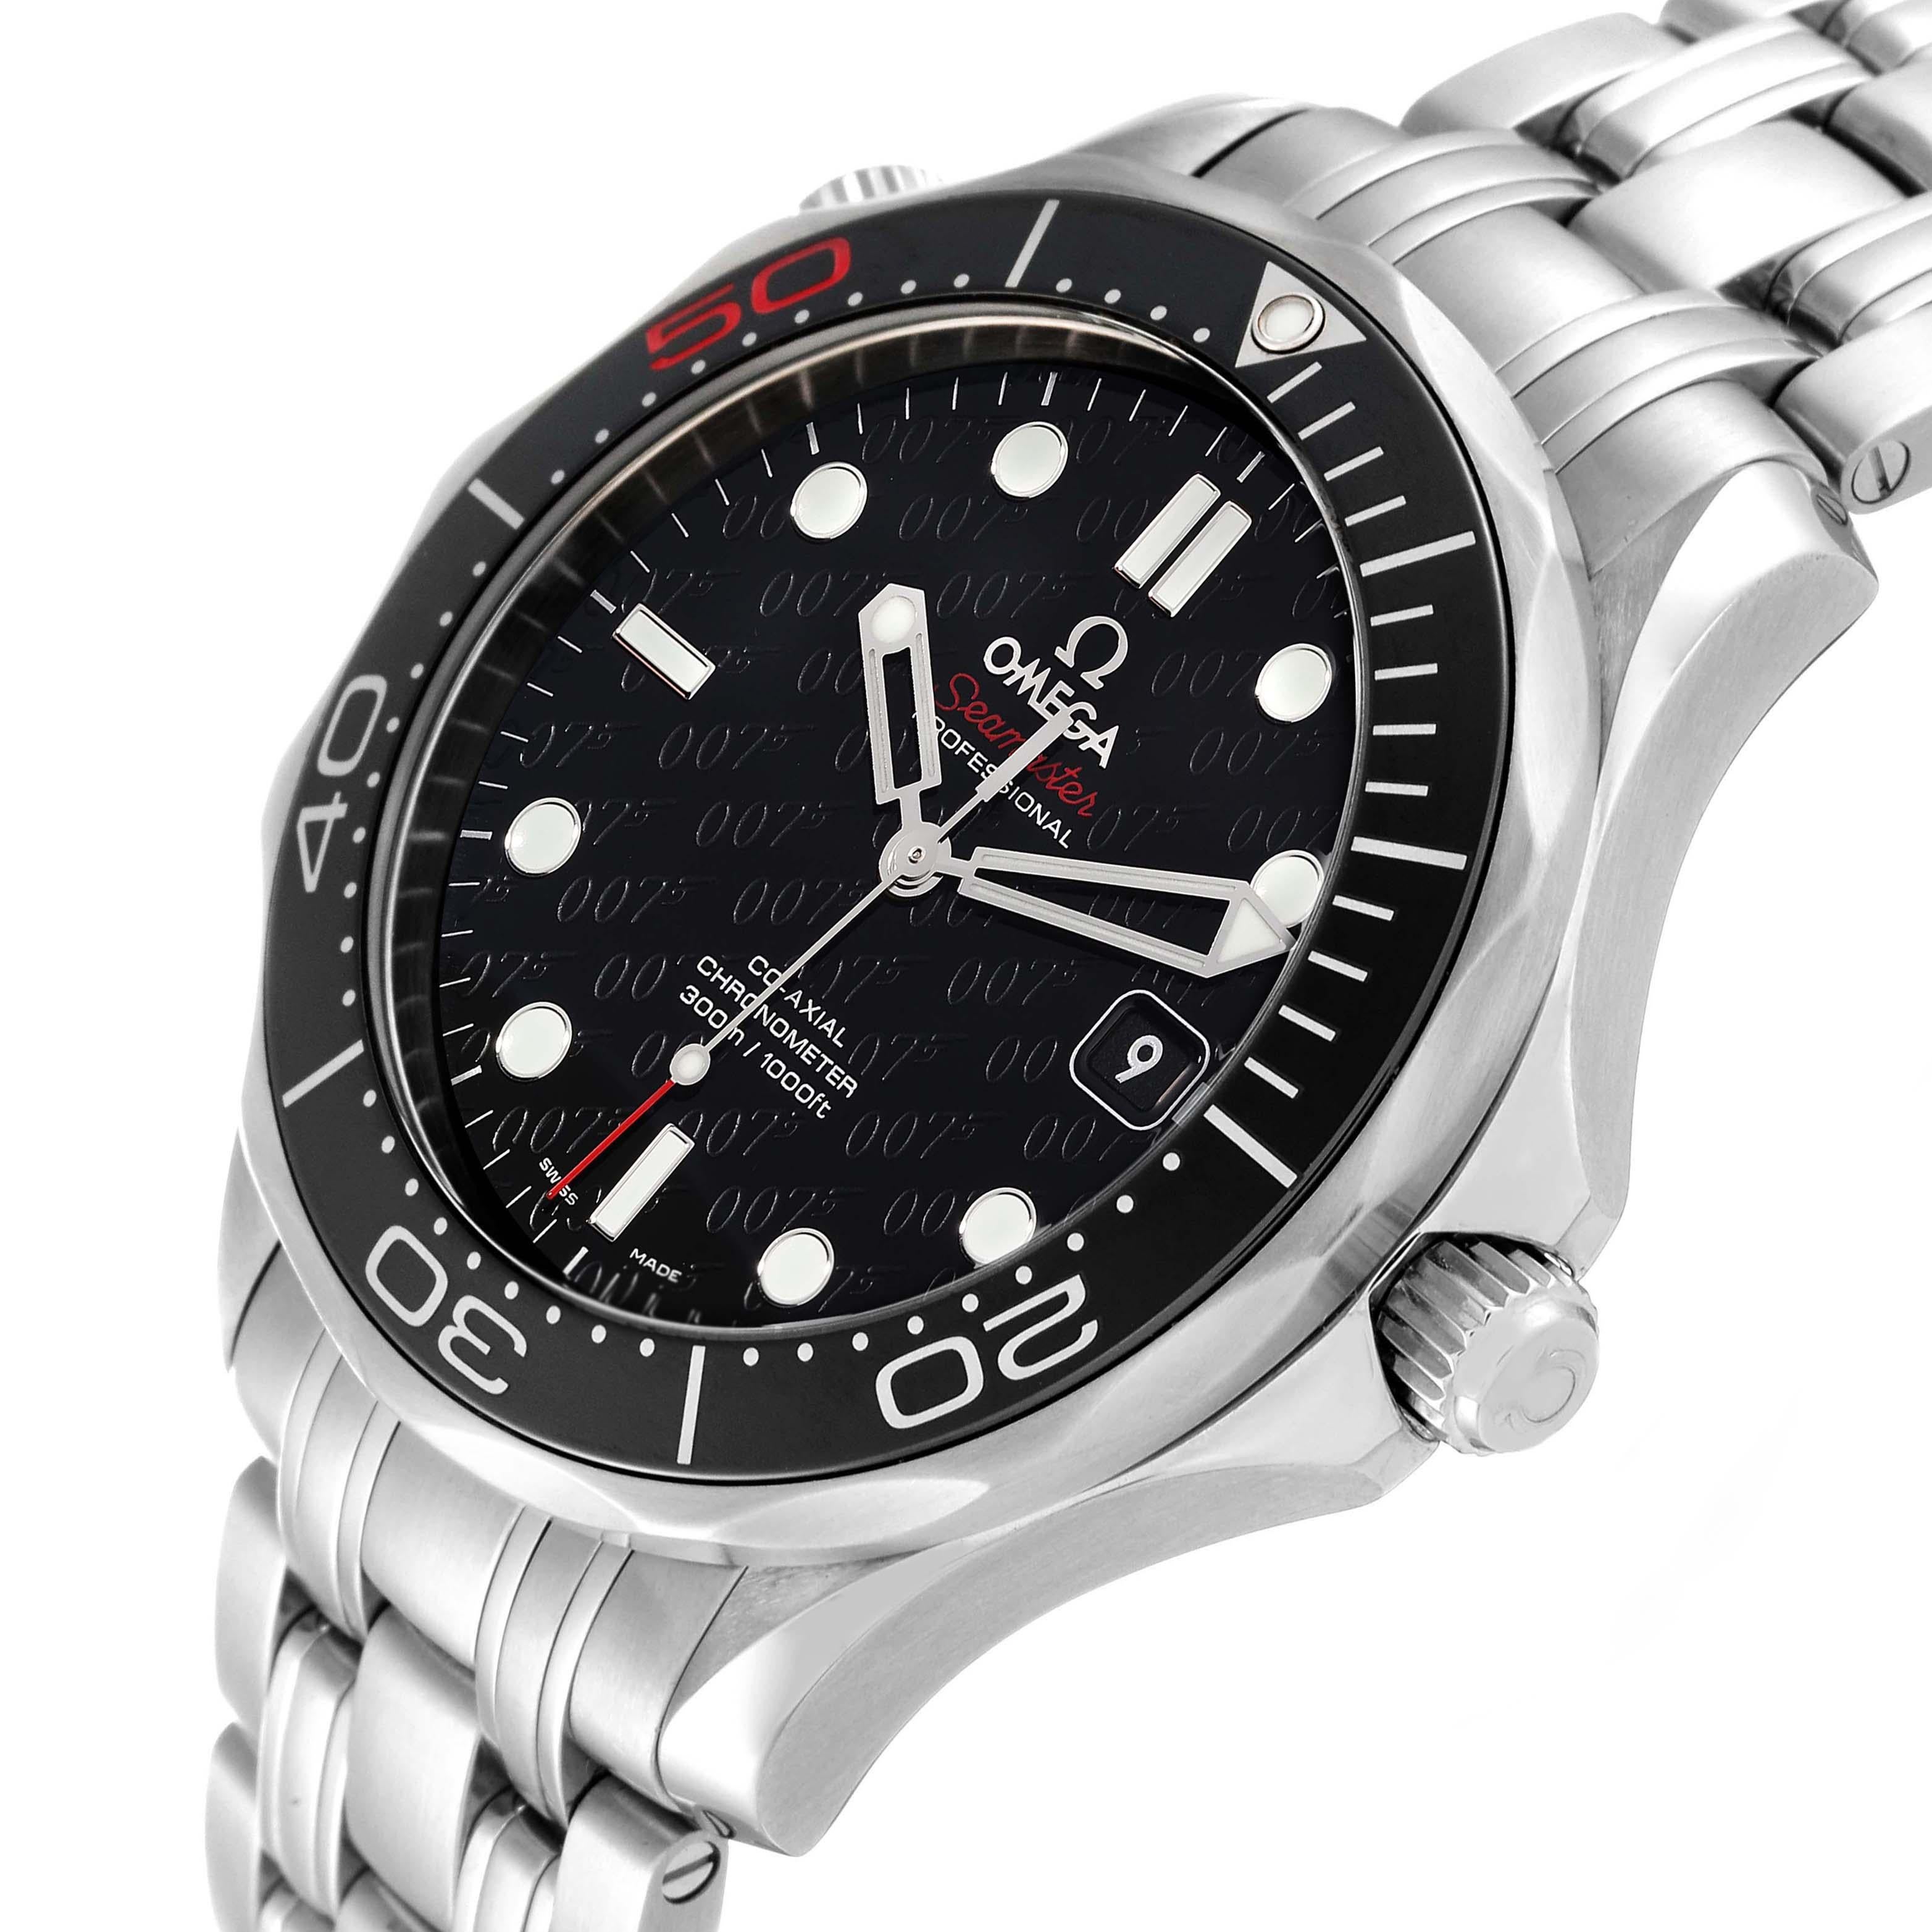 Omega Seamaster Limited Edition Bond 007 Steel Mens Watch 212.30.41.20.01.005 Box Card. Automatic self-winding Co-Axial Escapement-equipped movement with rhodium-plated finish. Power reserve: 48 hours. Stainless Steel case 41.0 mm in diameter. Omega